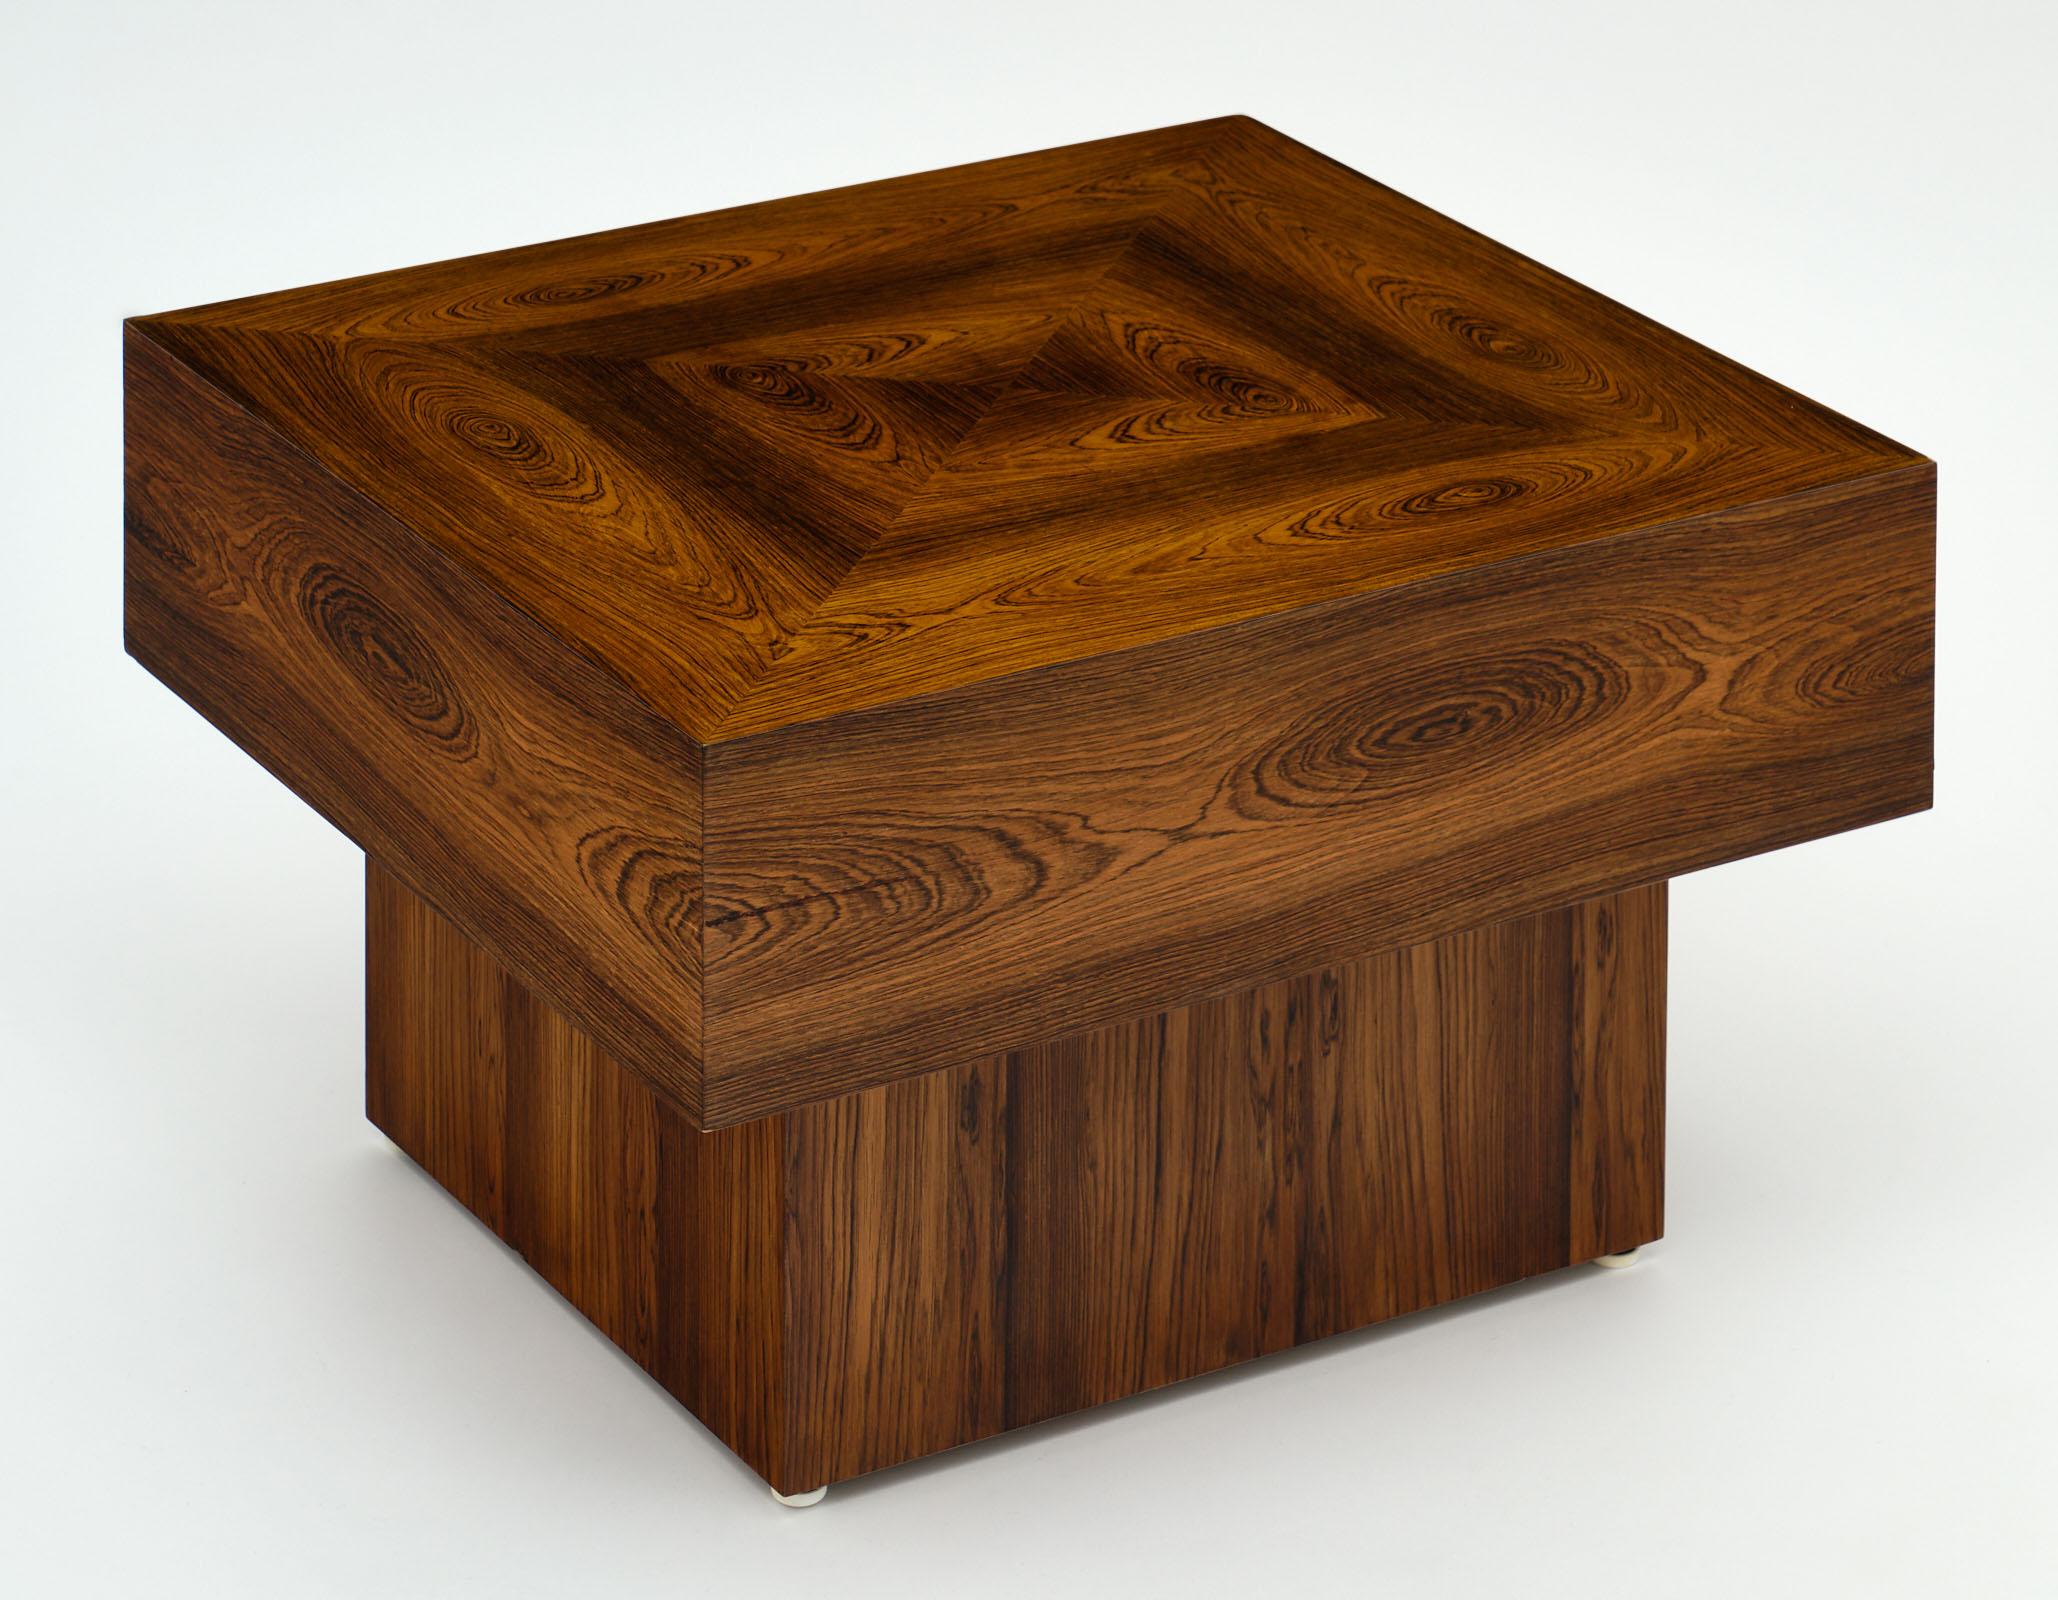 A unique cubist French wood side table made of Brazilian rosewood veneer with clean lines and a very modernist flair. We love the warmth of this piece!